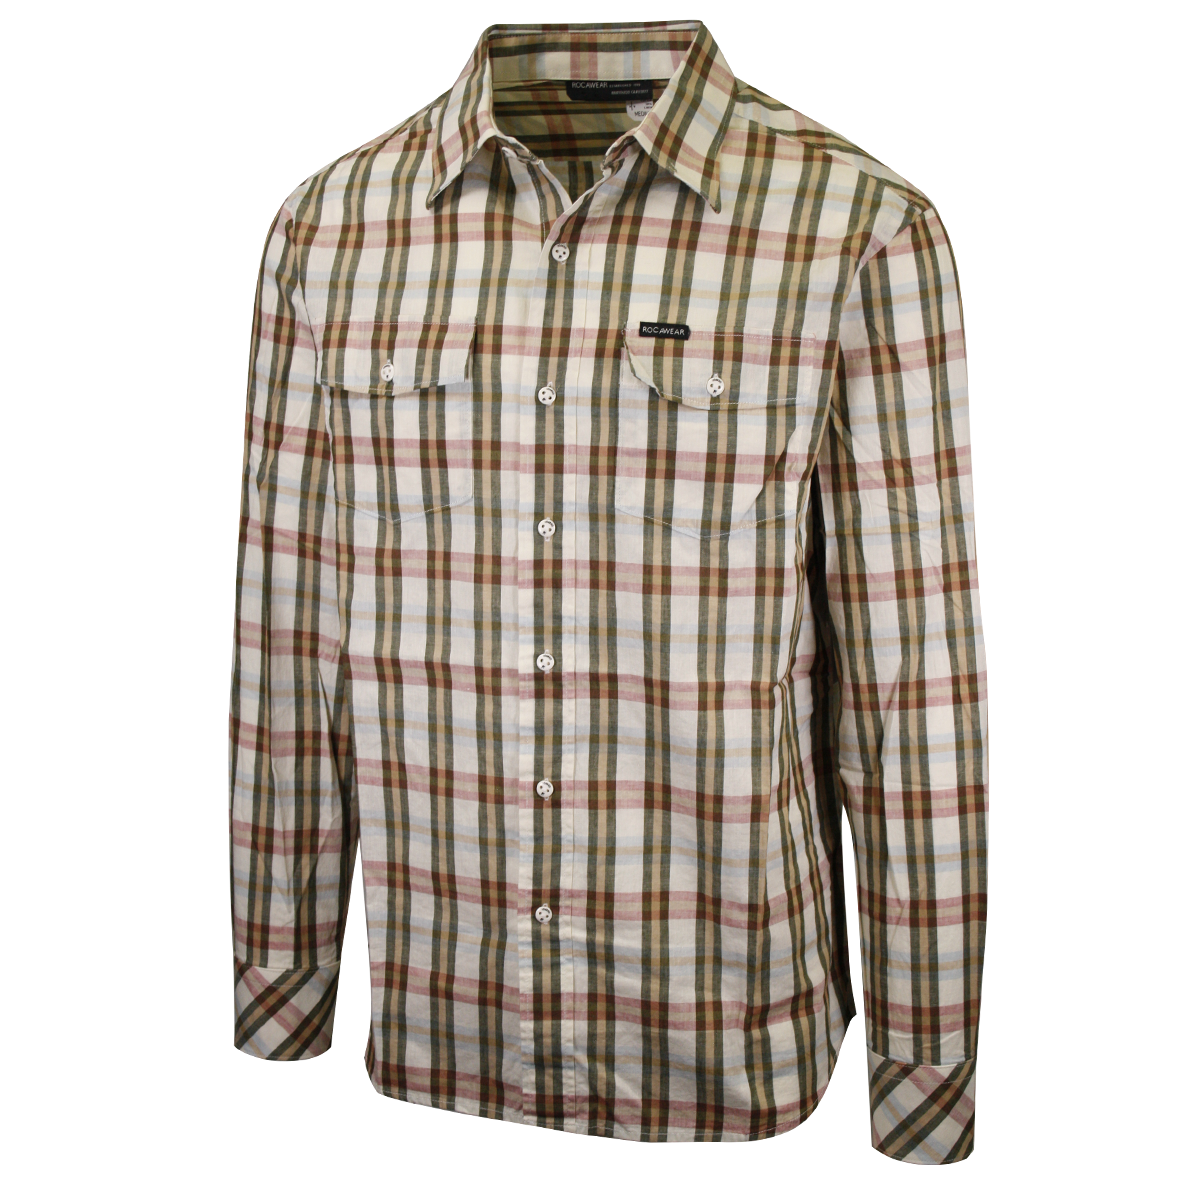 Rocawear Men's Vanilla Second To None Plaid L/S Woven Shirt (Size S & M)